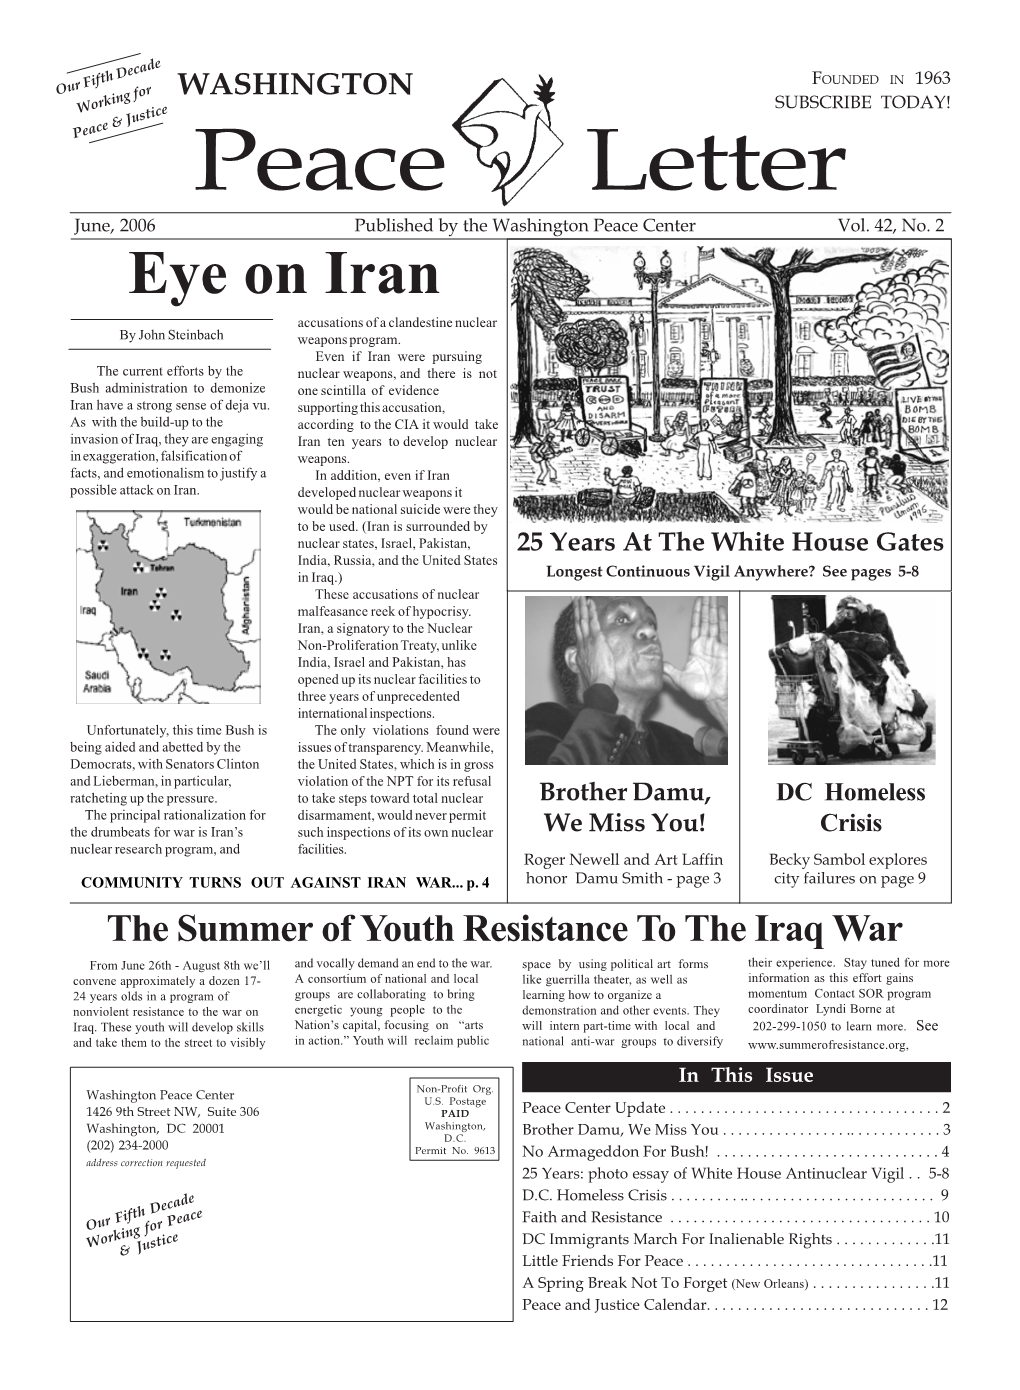 Eye on Iran Accusations of a Clandestine Nuclear by John Steinbach Weapons Program